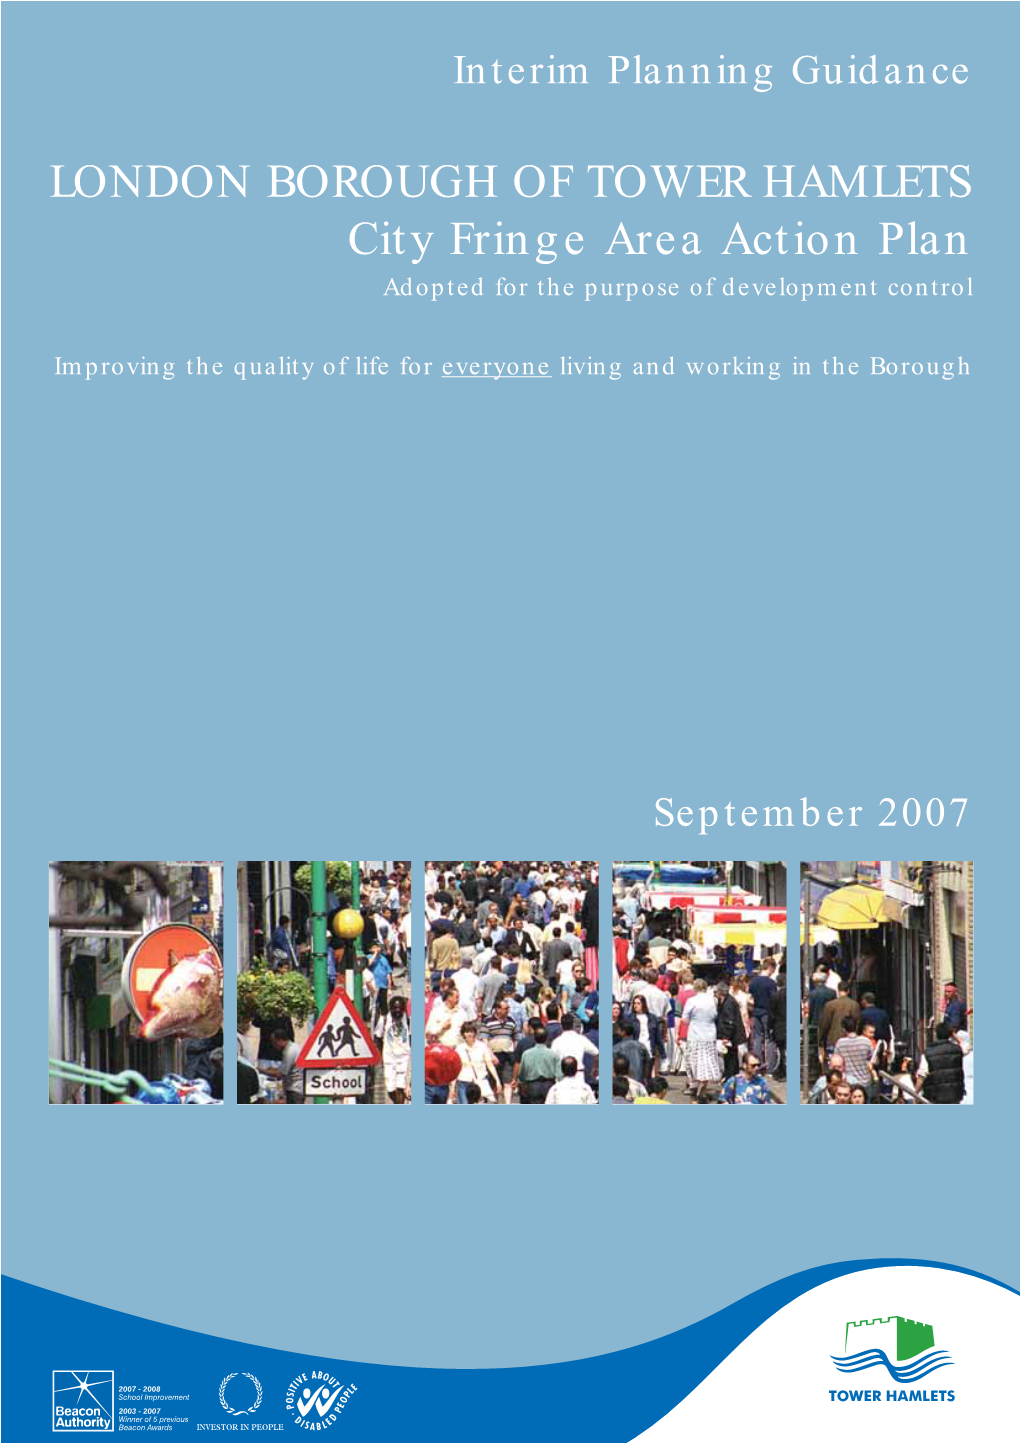 City Fringe Area Action Plan Adopted for the Purpose of Development Control